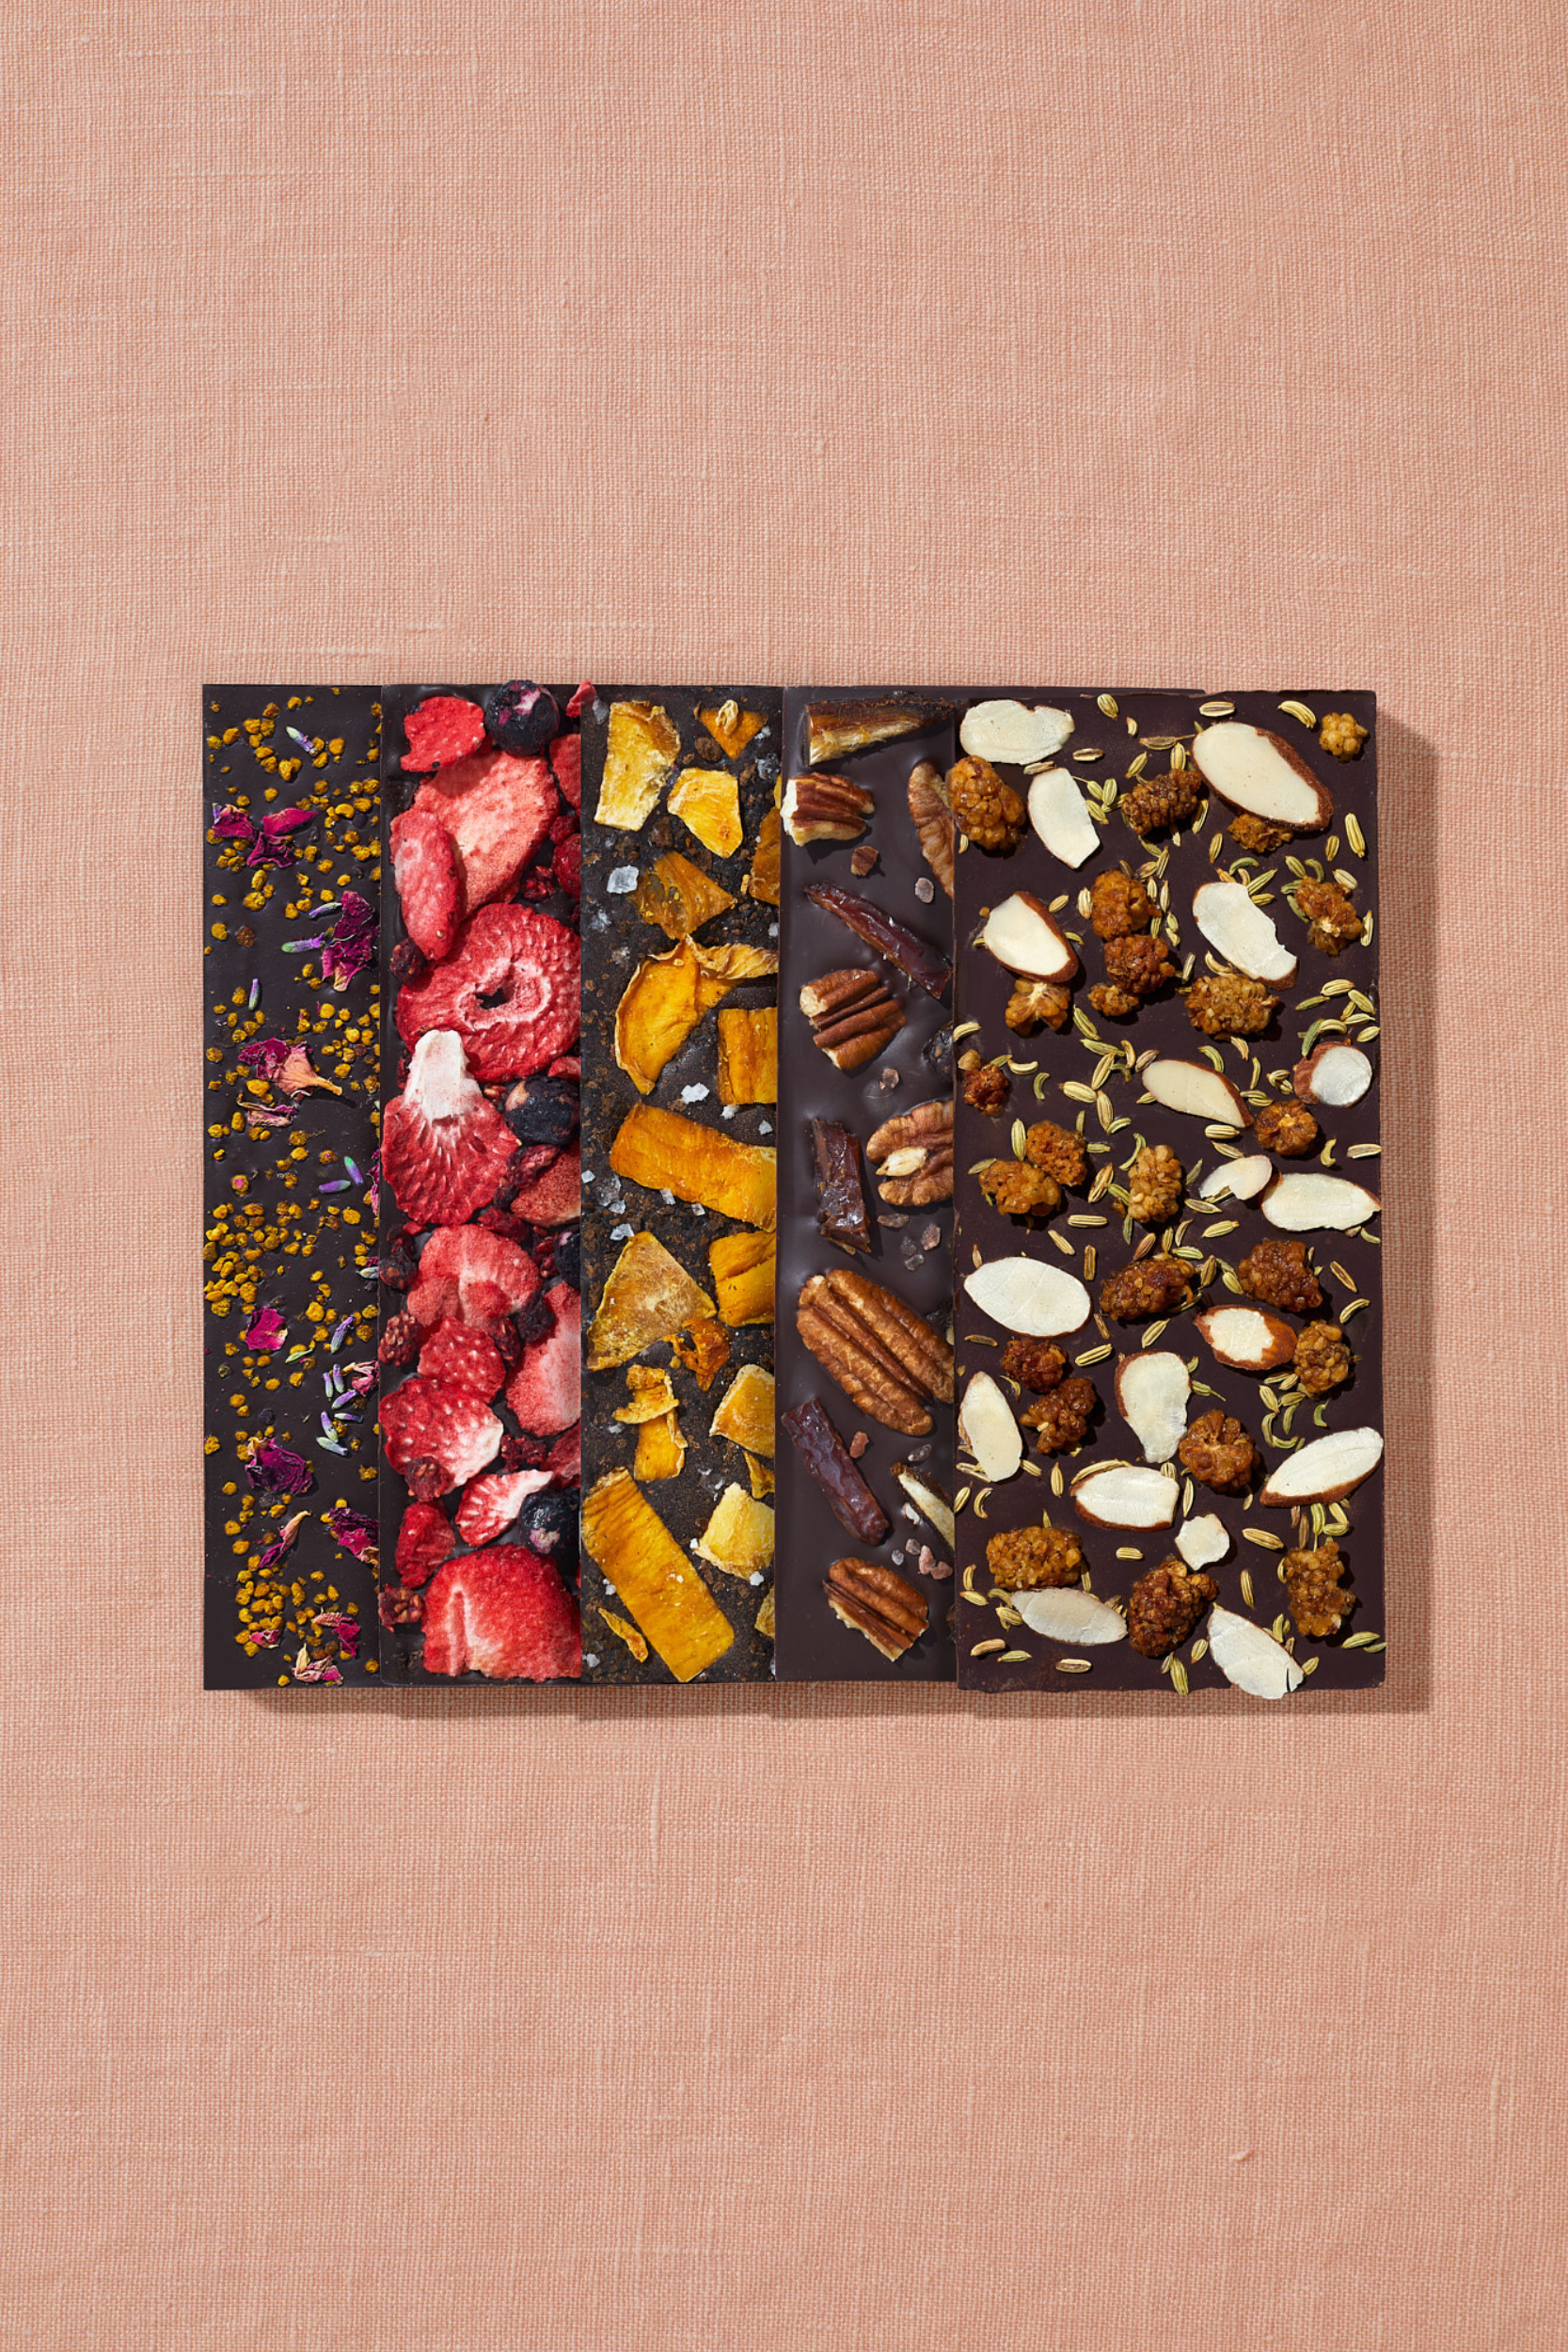 A set of 5 date sweetened chocolate bars with no added sugar is arranged in a flay lay upon peach linen fabric. Warm, direct light hits the bars, which go from left to right, starting with Lavender, Bee Pollen, Rose Petal; Mixed Berry; Medjool Date, Pecan, Himalayan Salt; Mango, Urfa Chili, Black Lime; and, White Mulberry, Almond, Fennel.